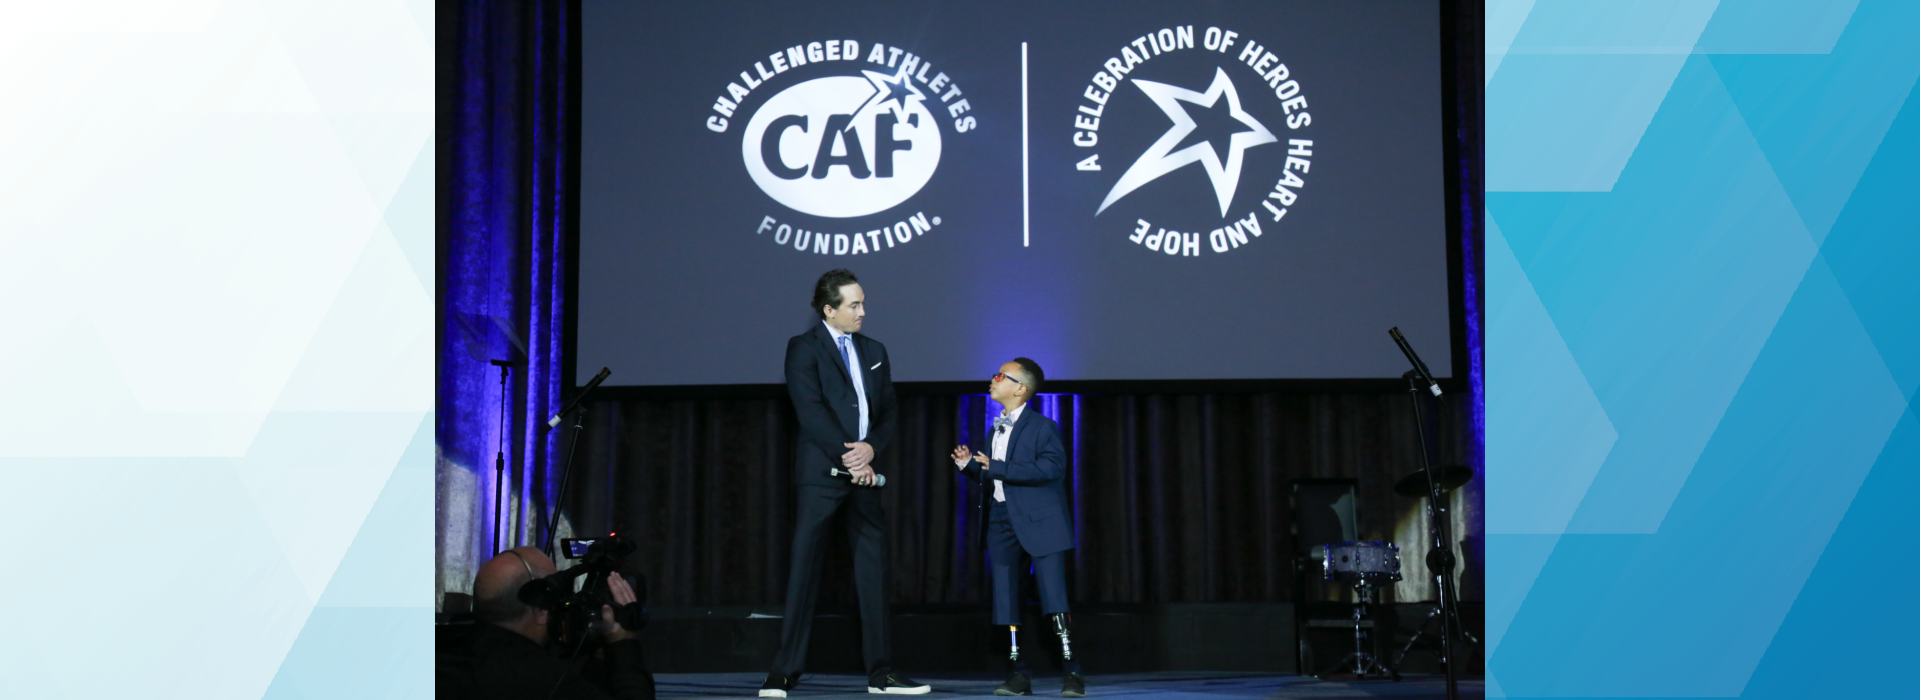 Challenged Athletes Foundation to Host Its Extraordinary